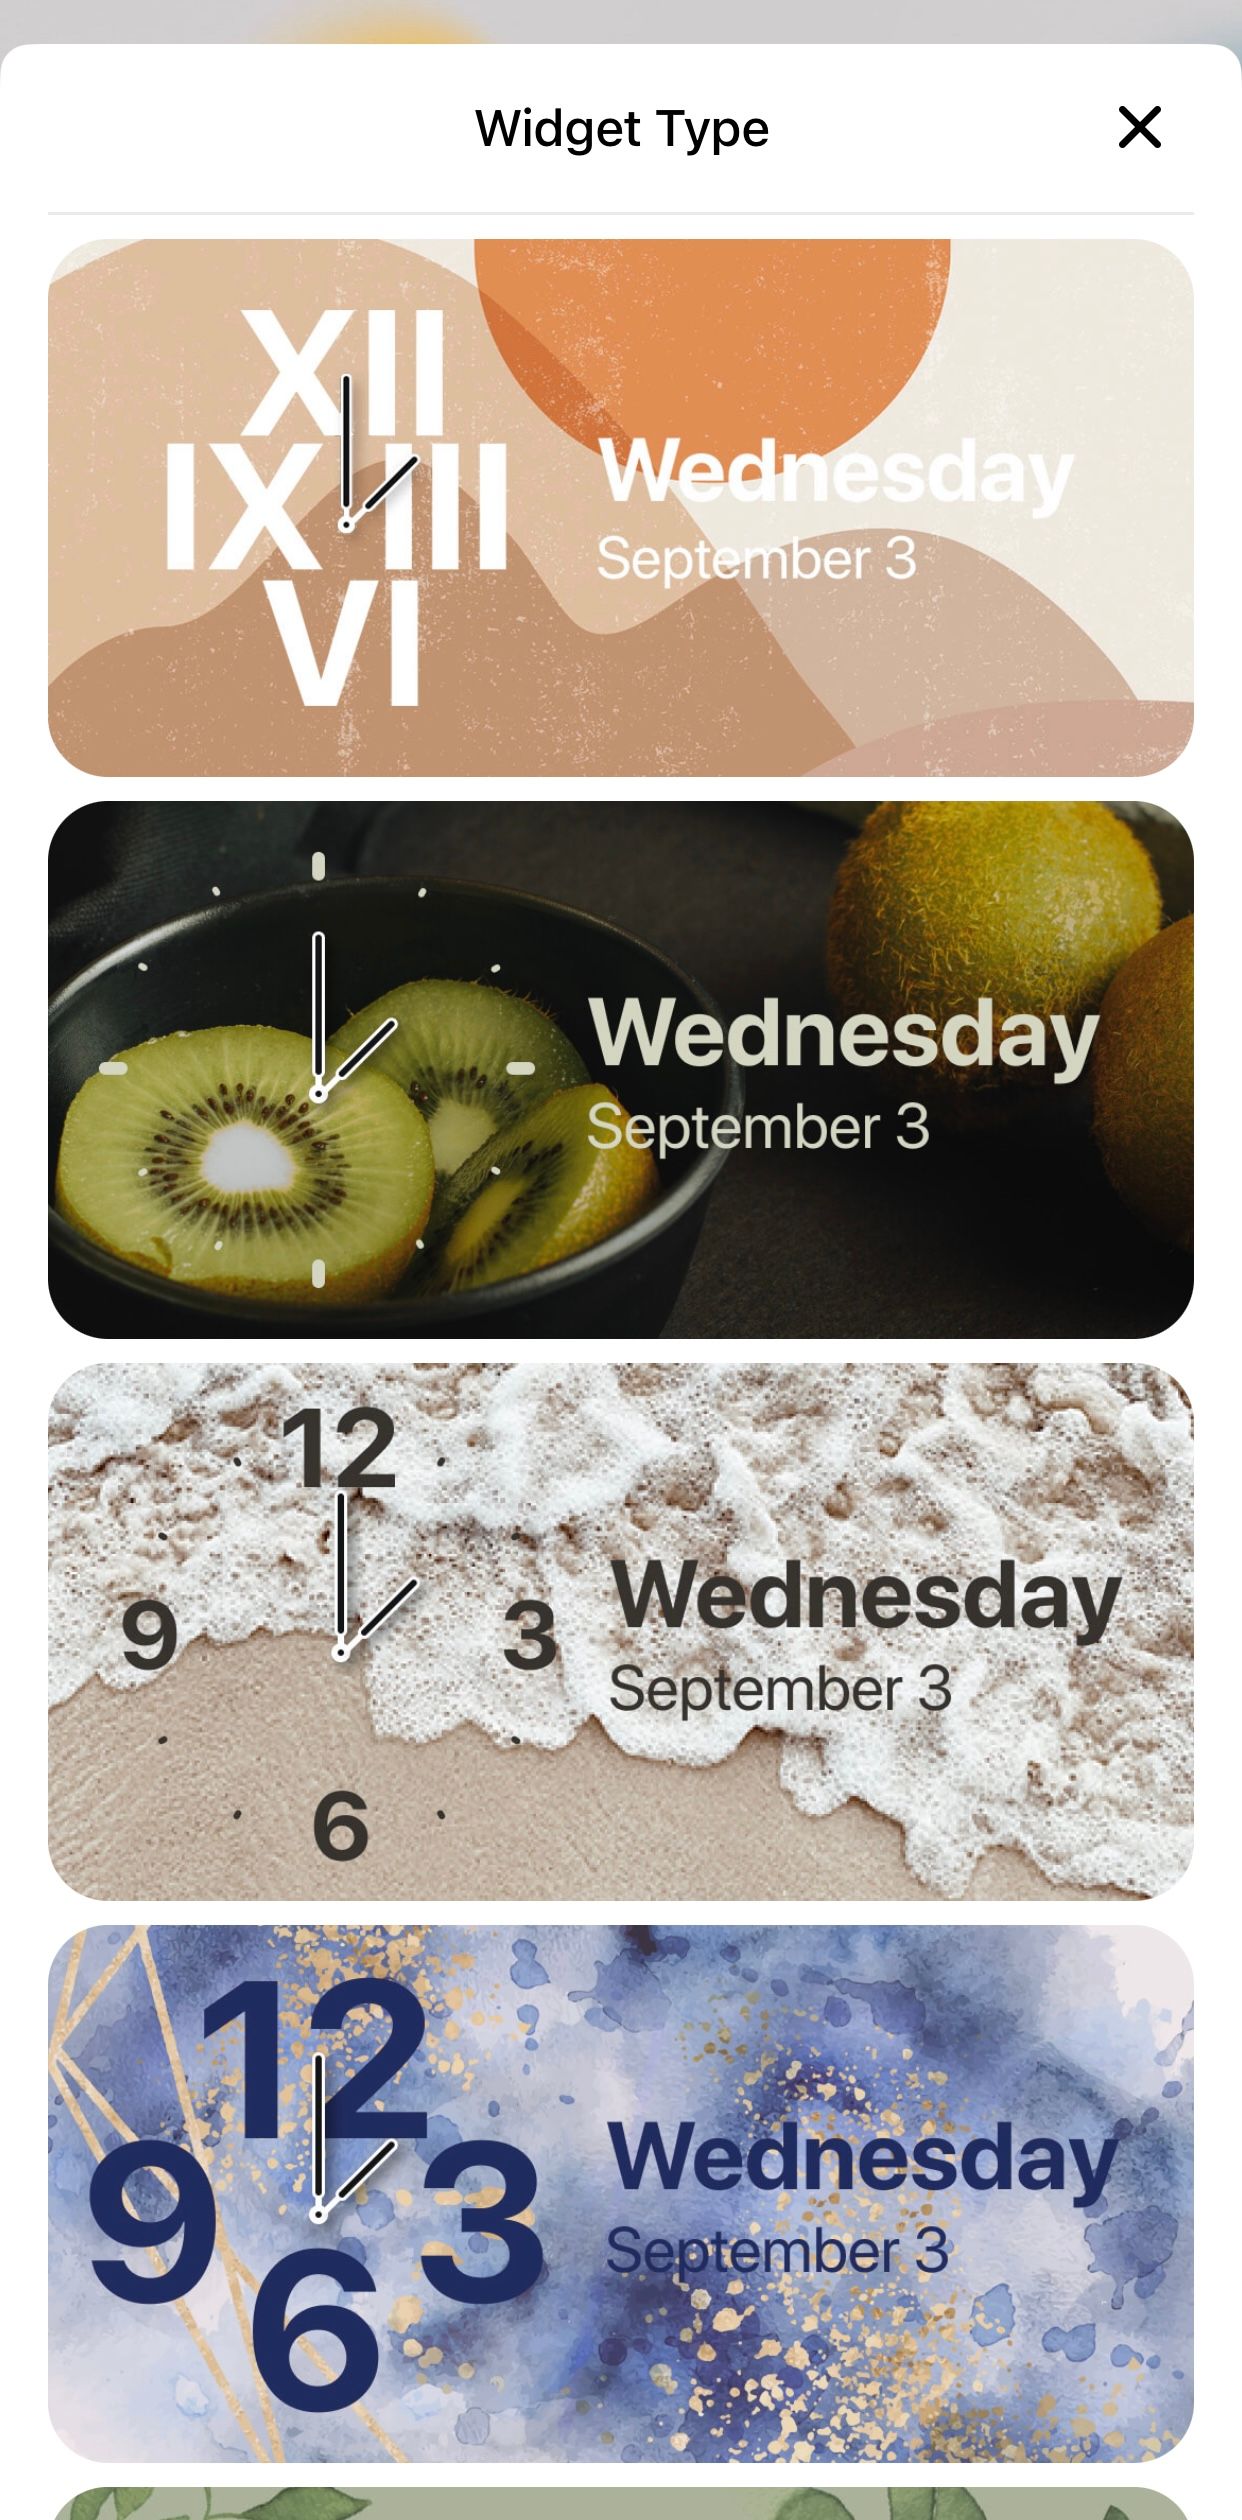 Various types of widgets on Themify displaying the date and time